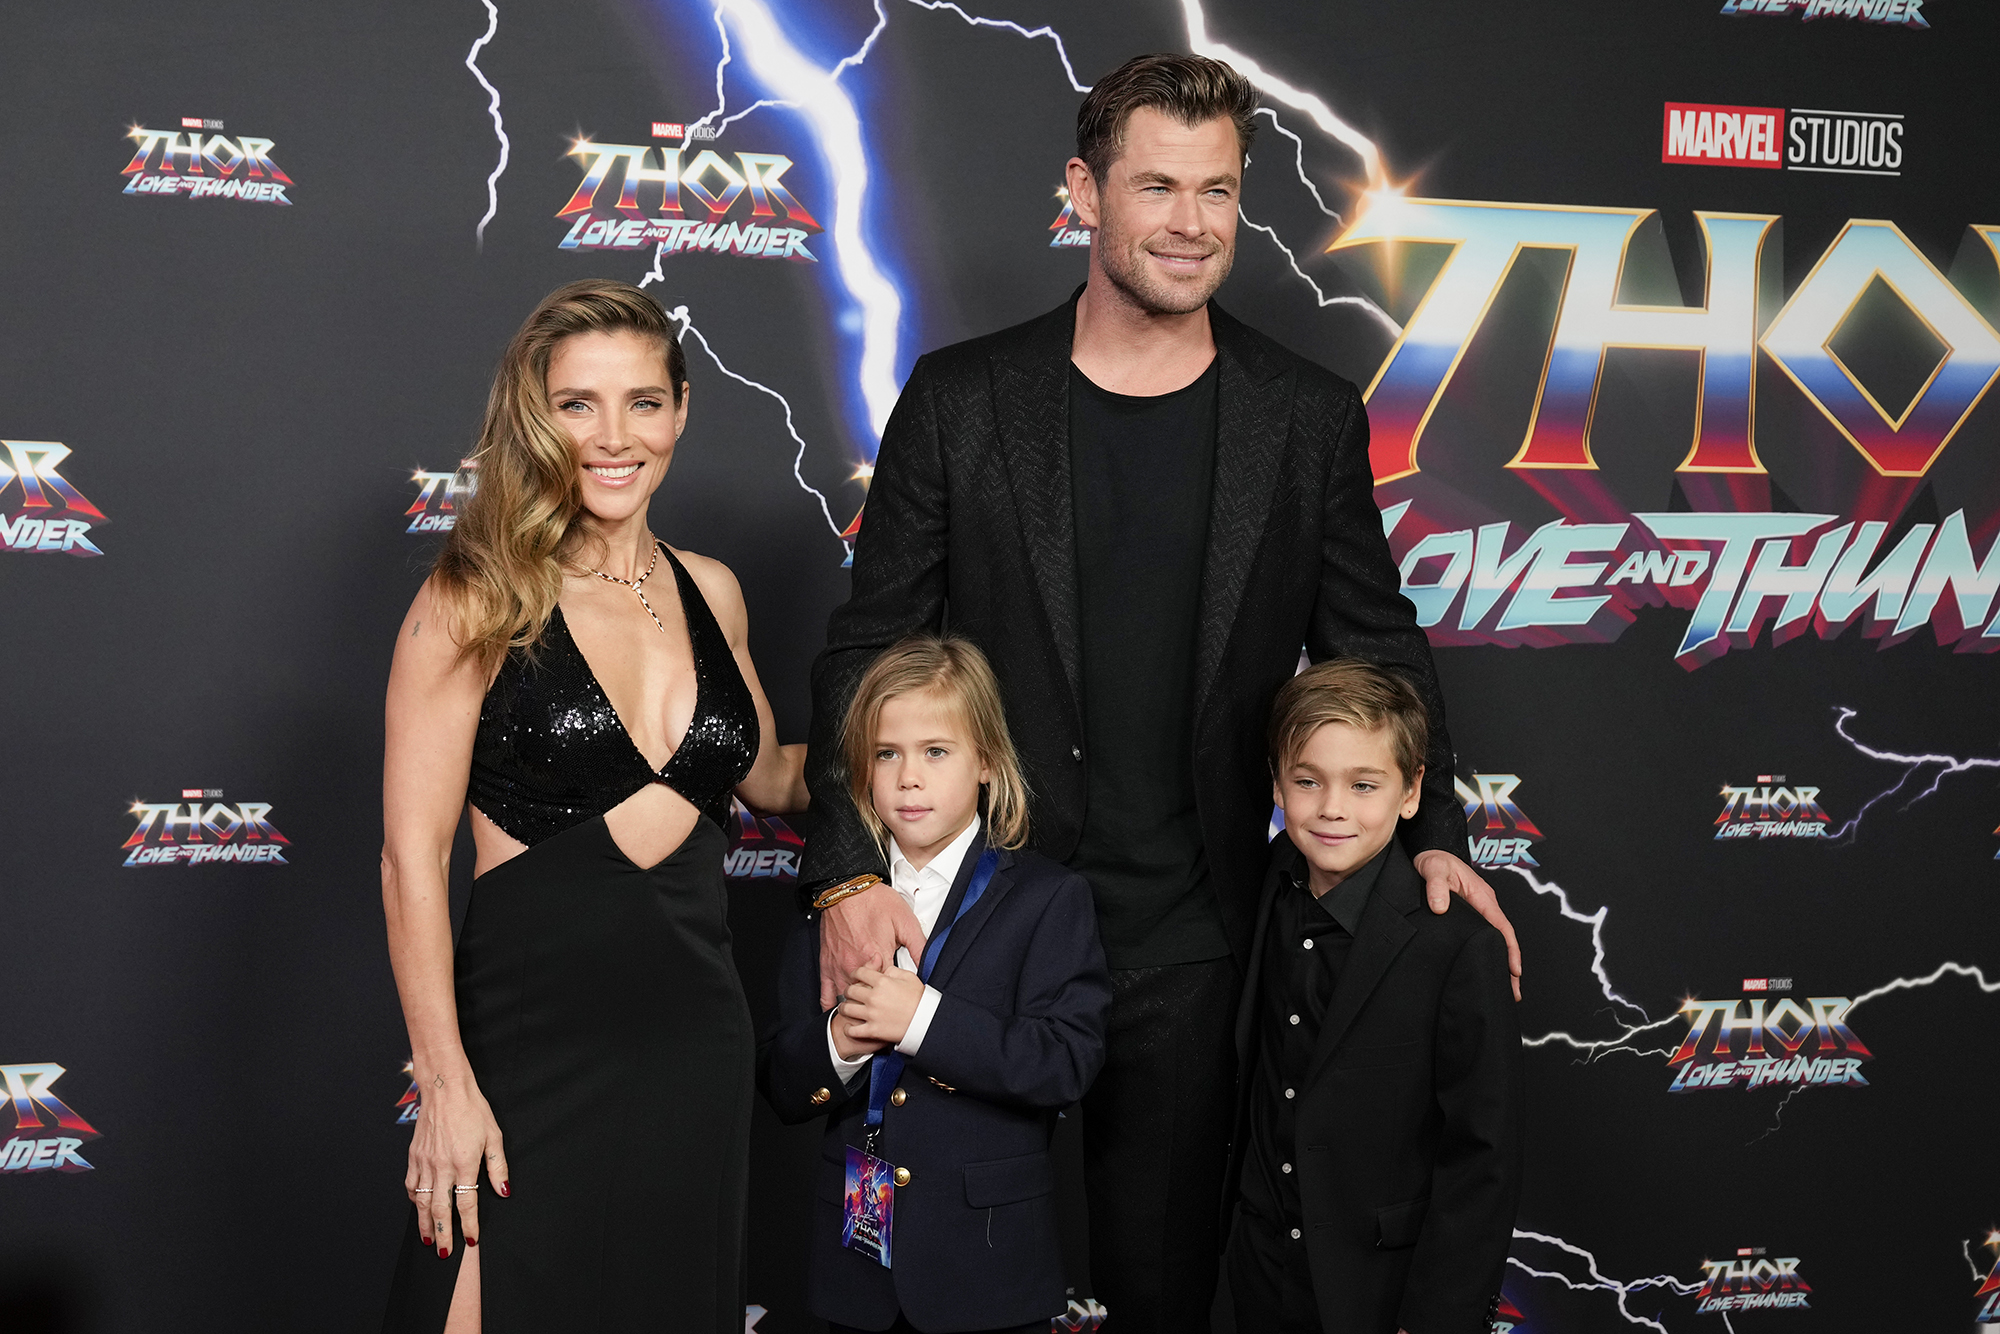 Thor: Love and Thunder': All Cast and Characters Confirmed and